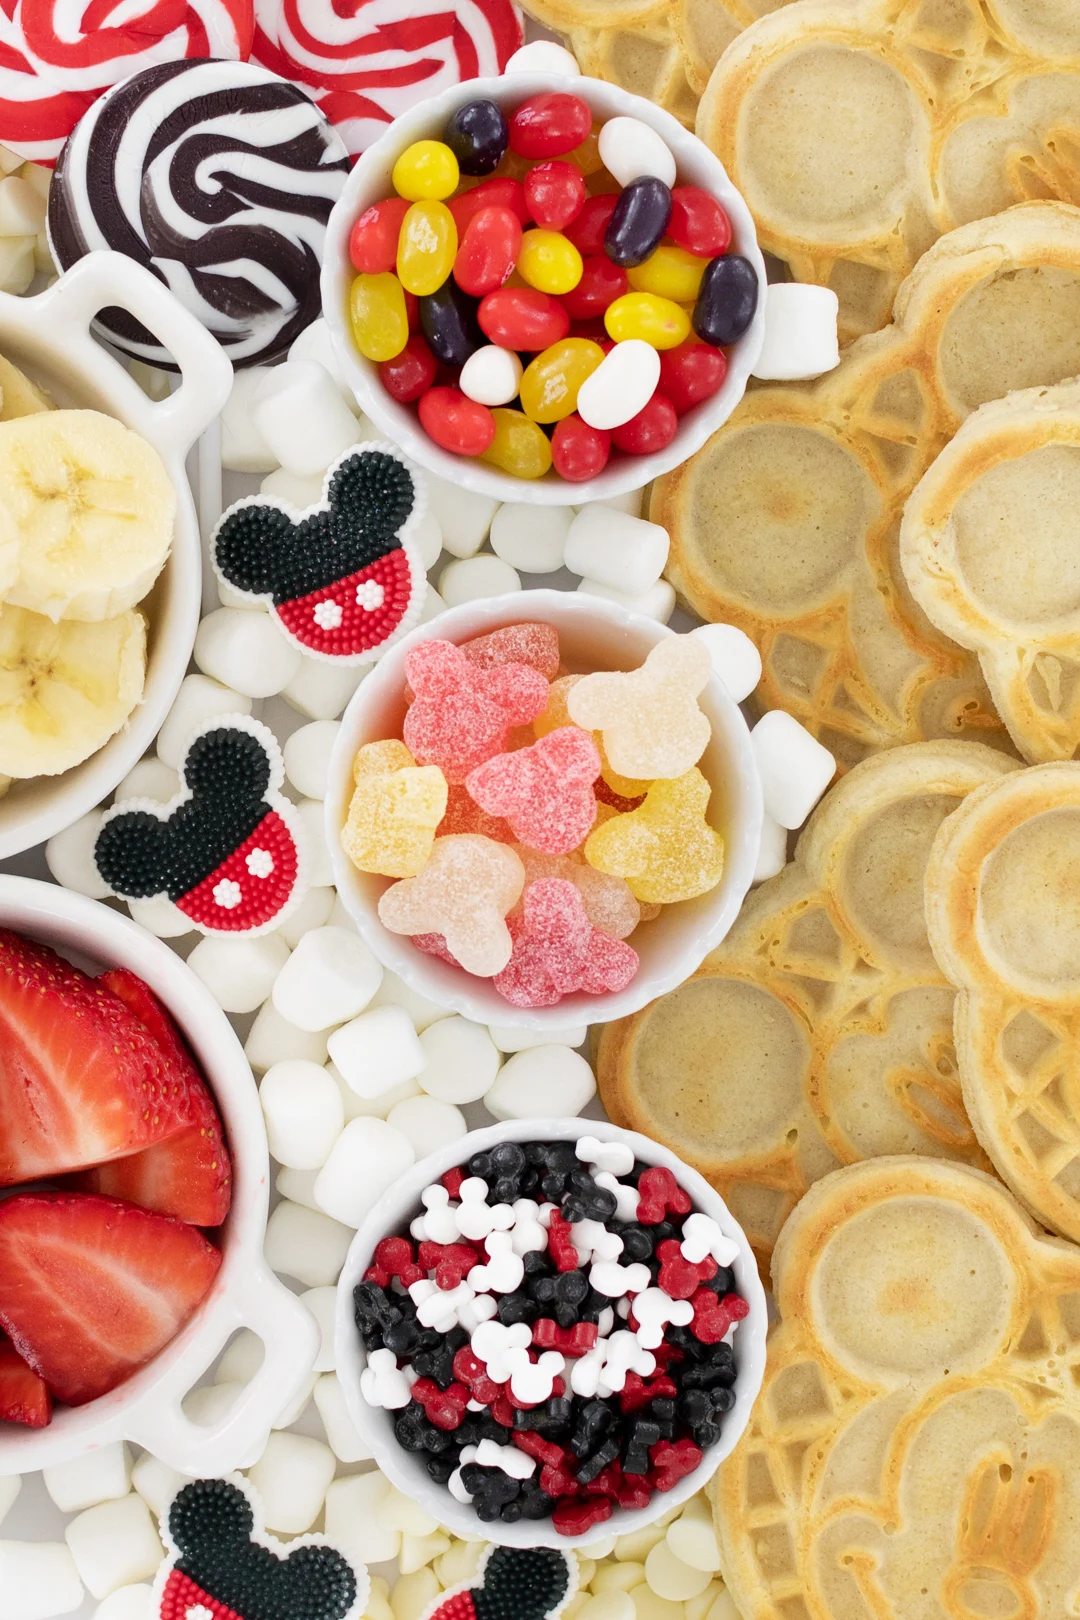 mickey mouse sprinkles, candies and jelly beans up close